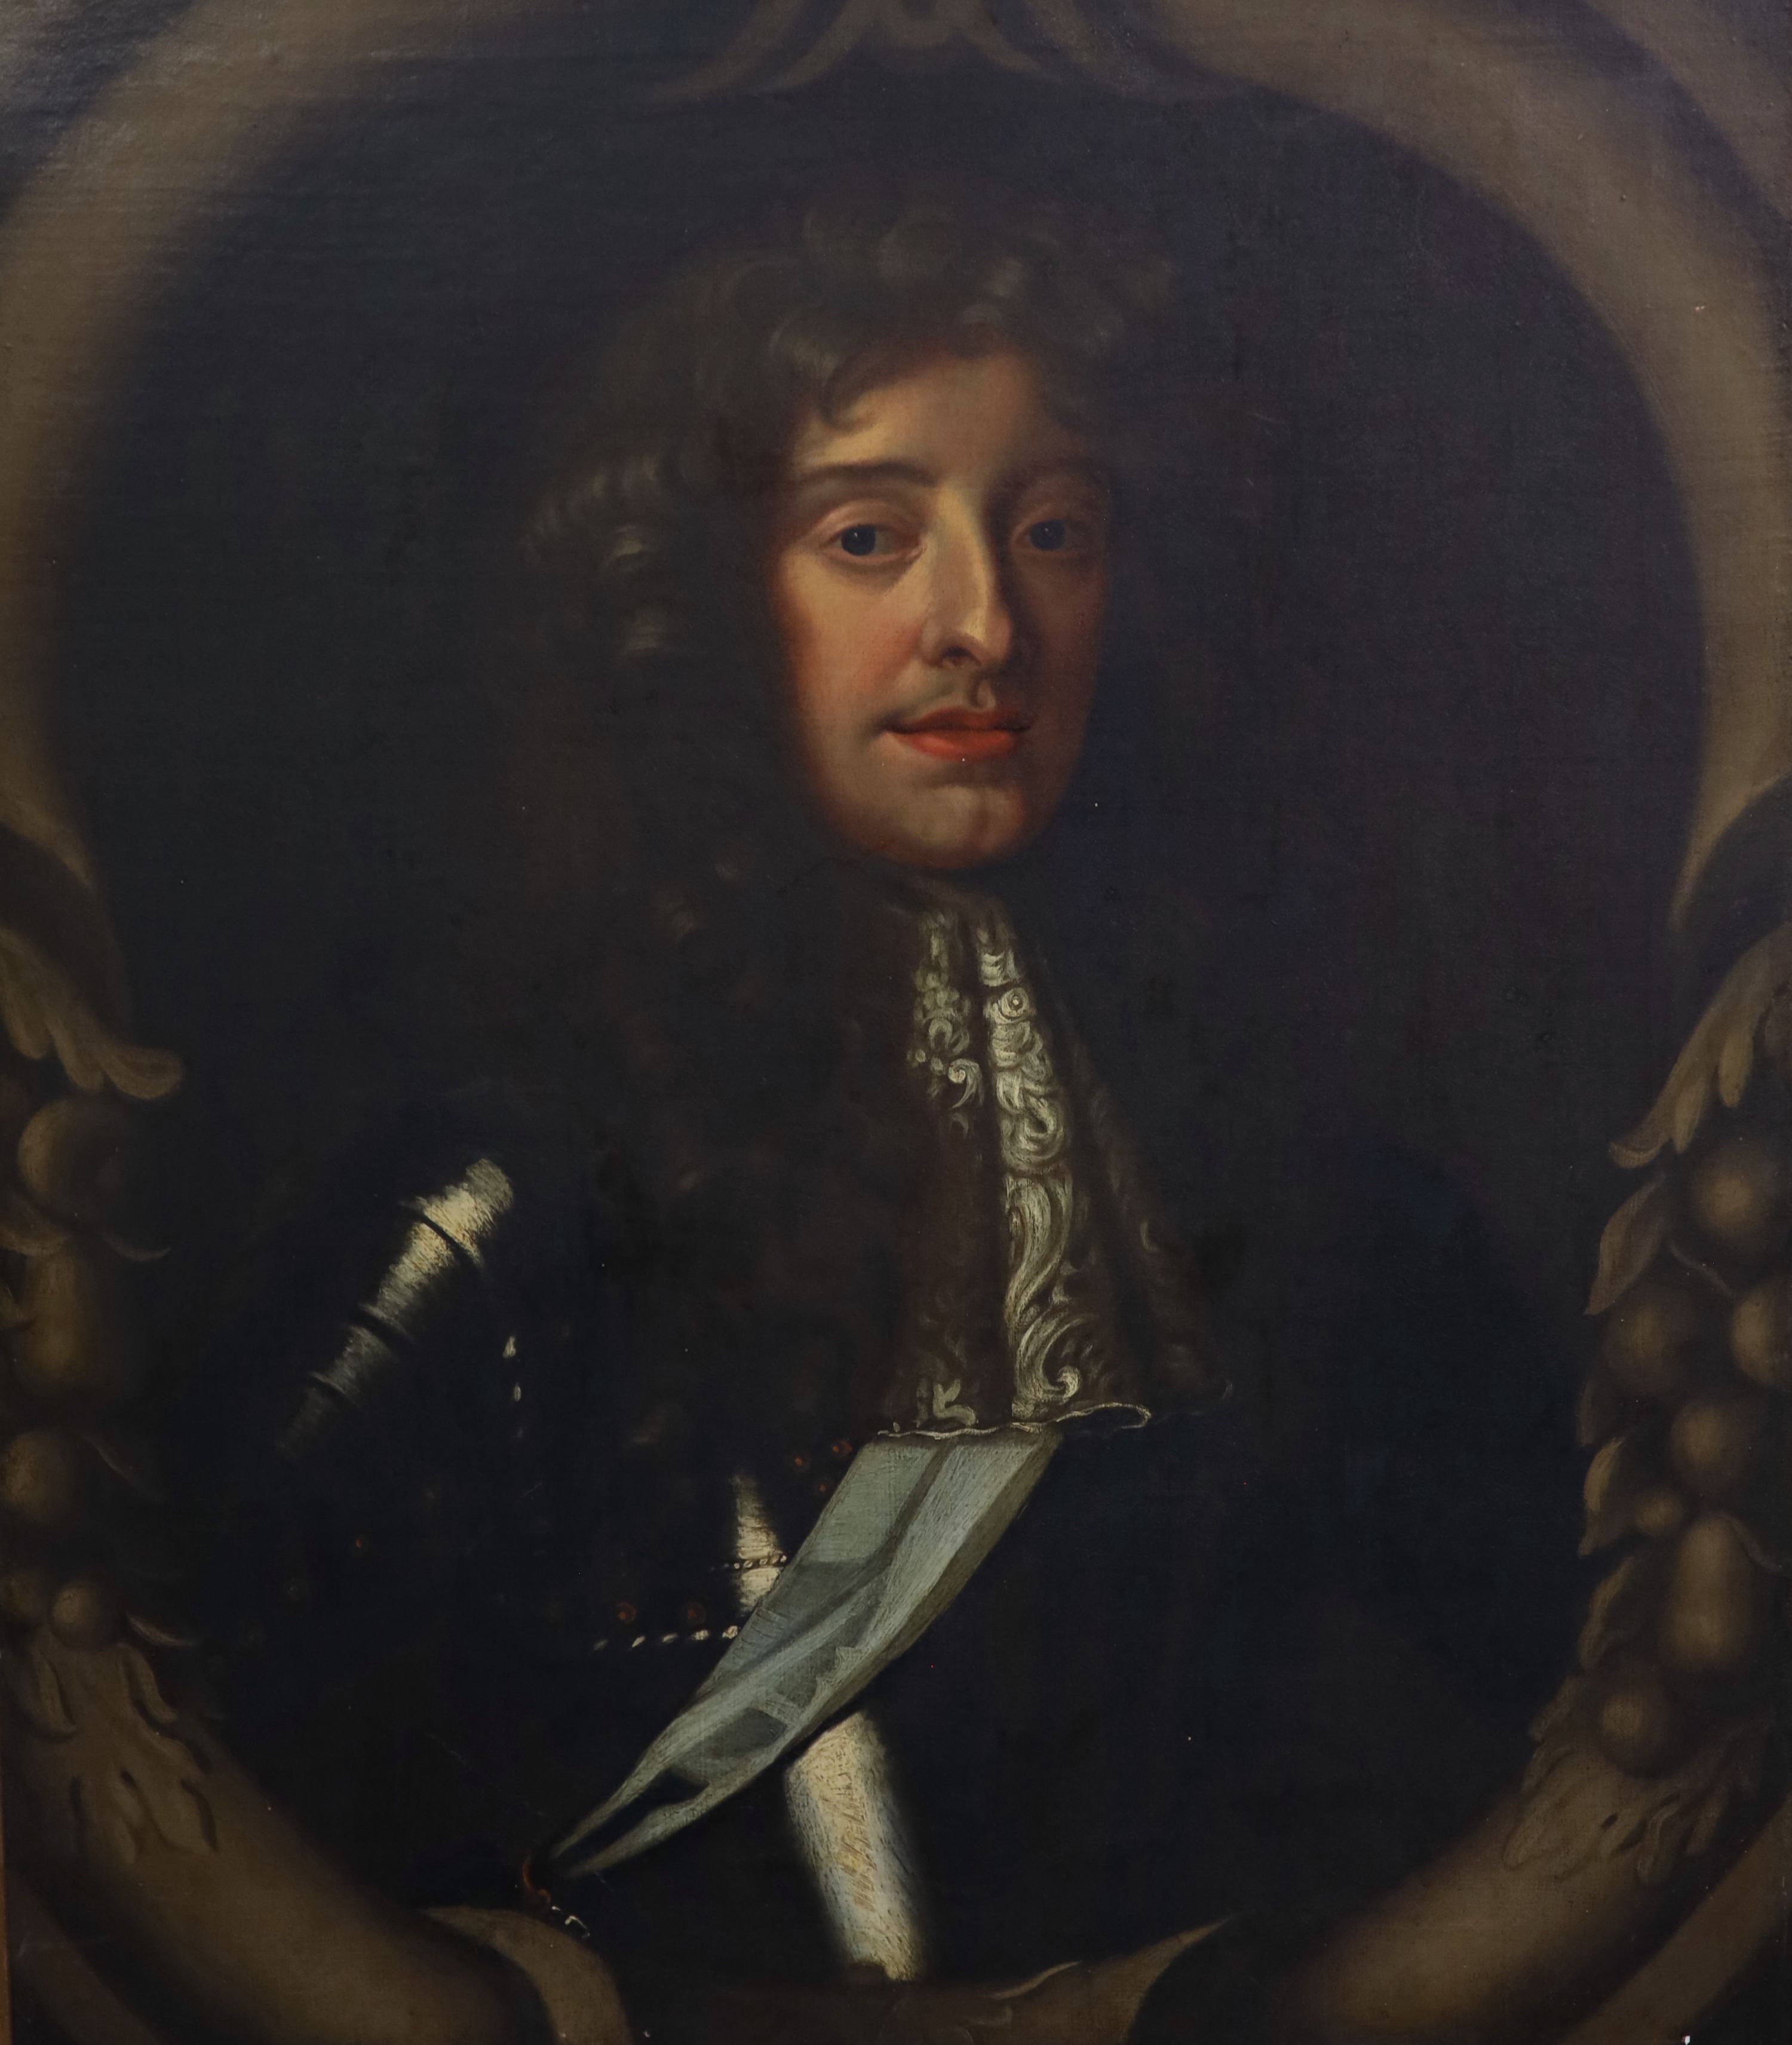 After Sir Peter Lely (1618-1680), Portrait of James II, Oil on canvas, 75 x 62 cm